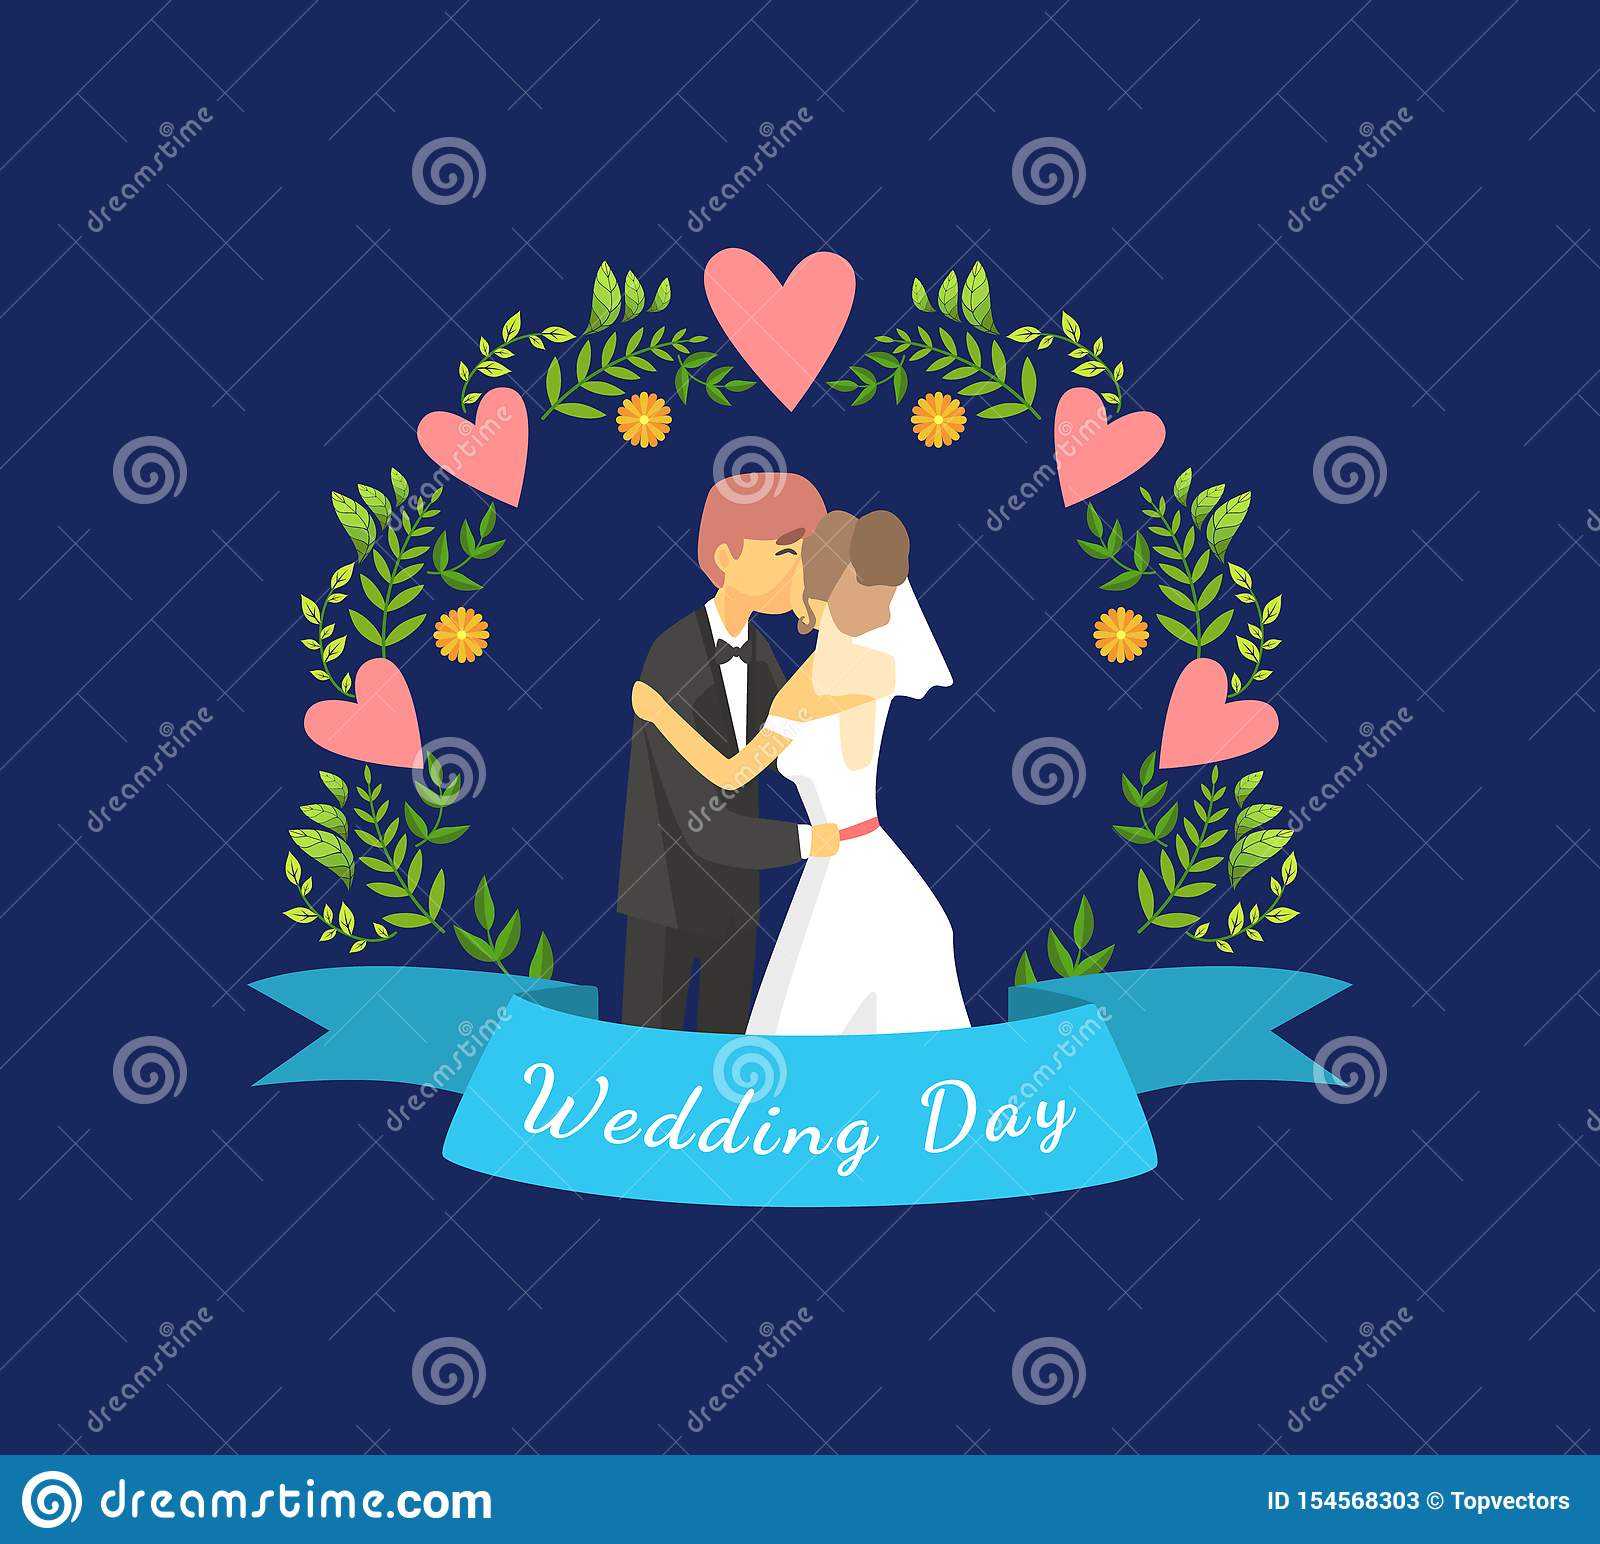 Wedding Day Banner Template With Just Married Couple, Happy With Bride To Be Banner Template